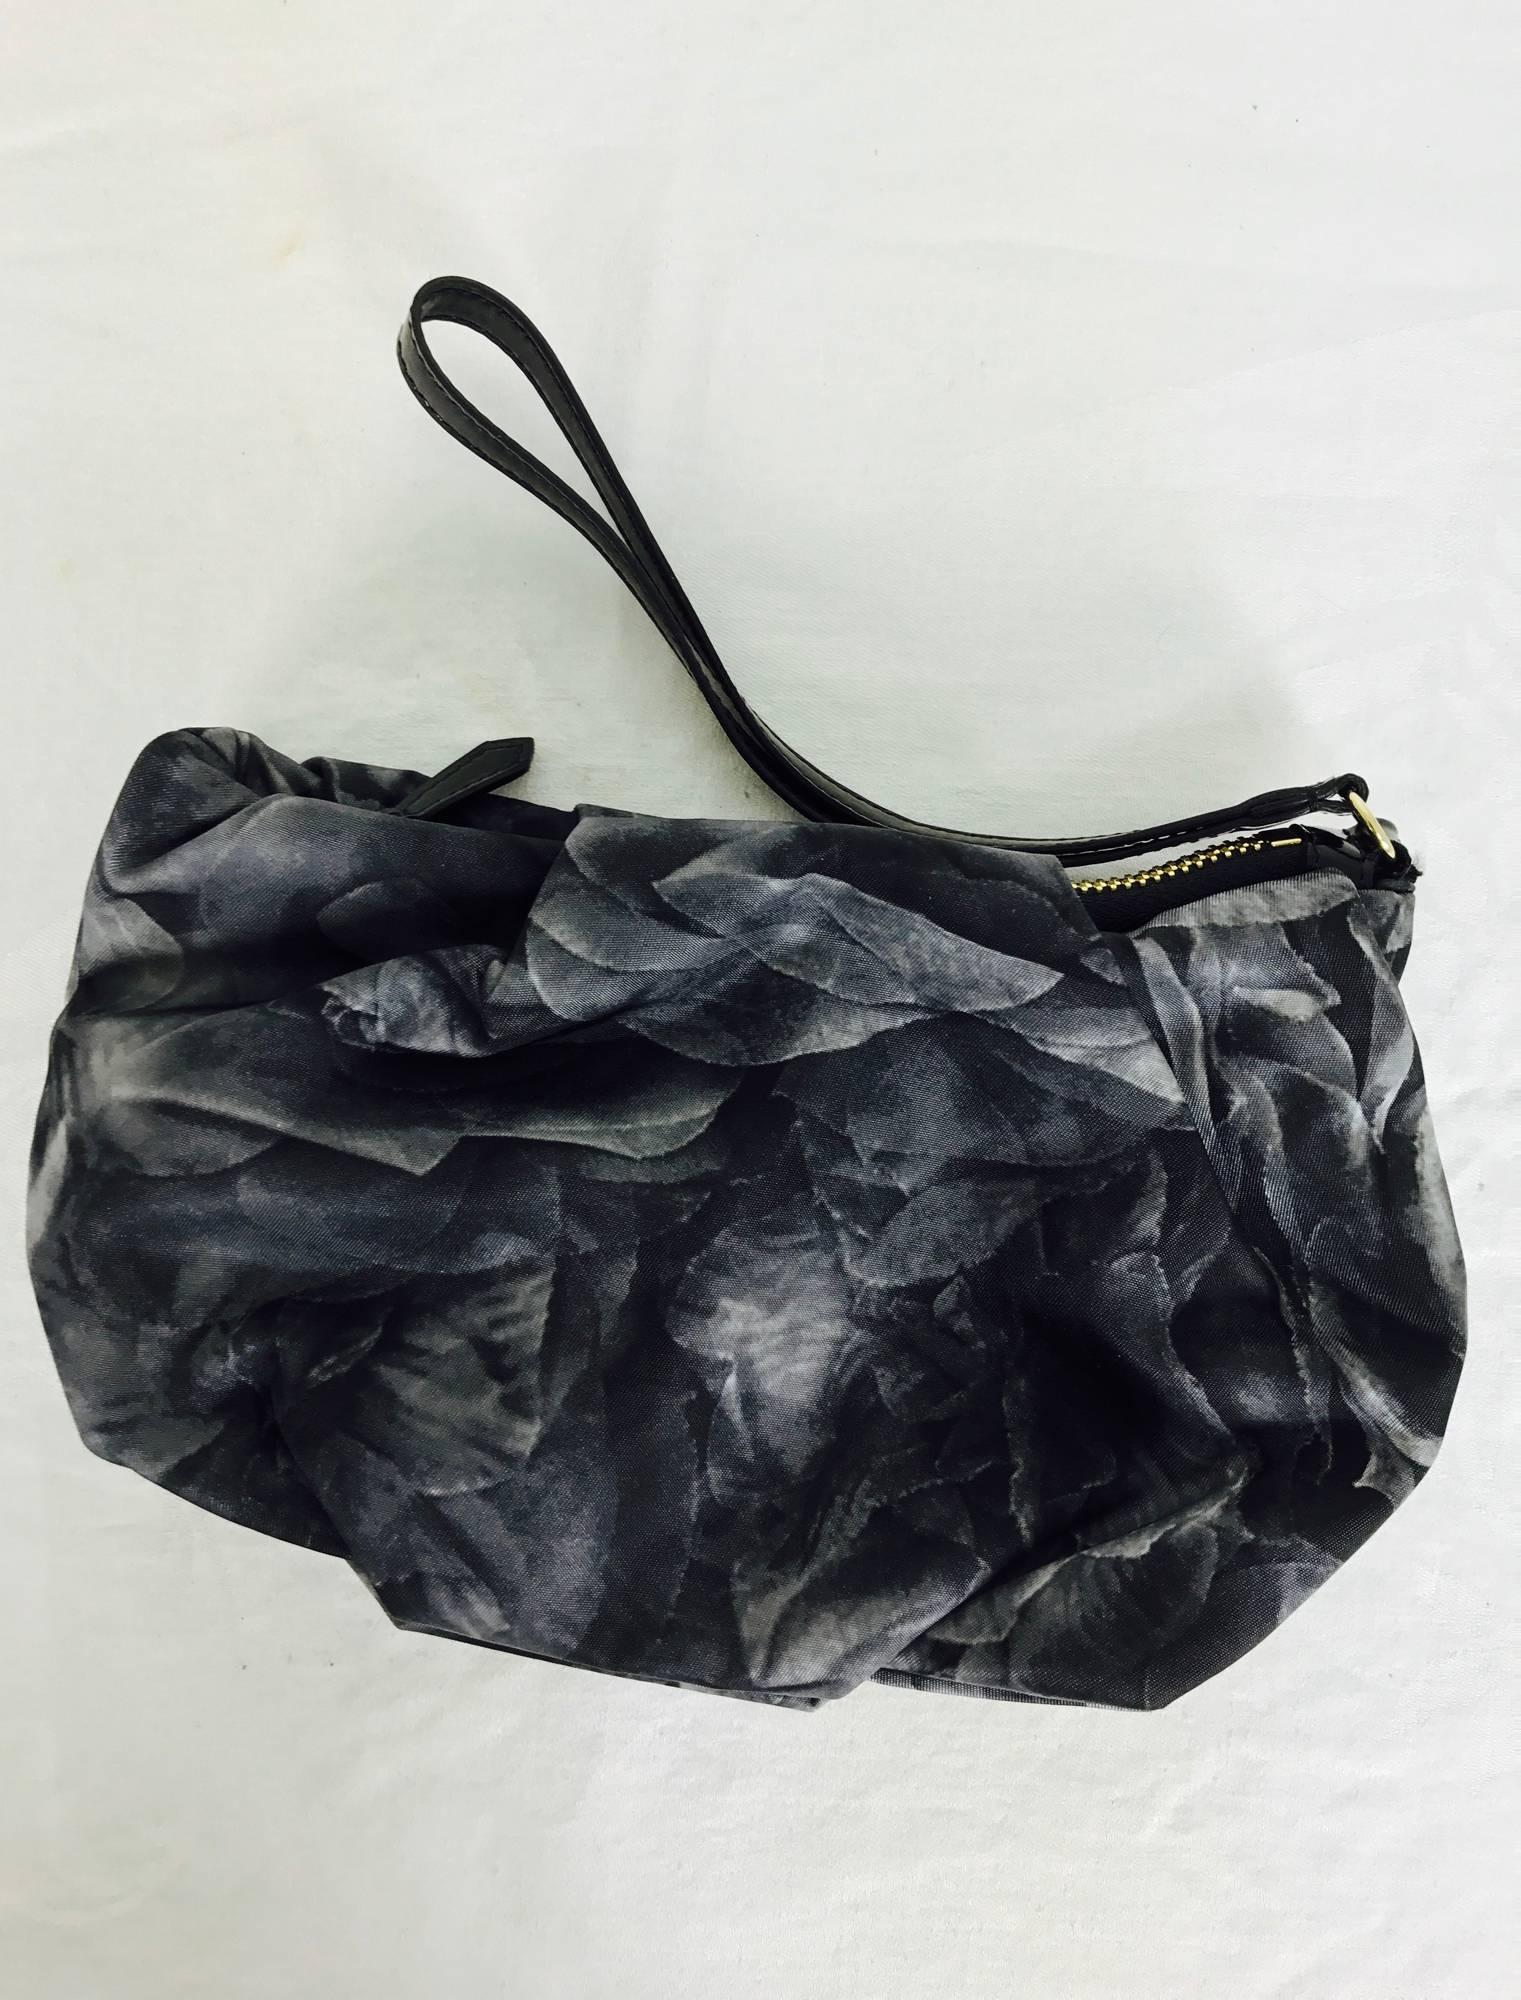 Valentino black roses zipper top clutch handbag with leather strap handle